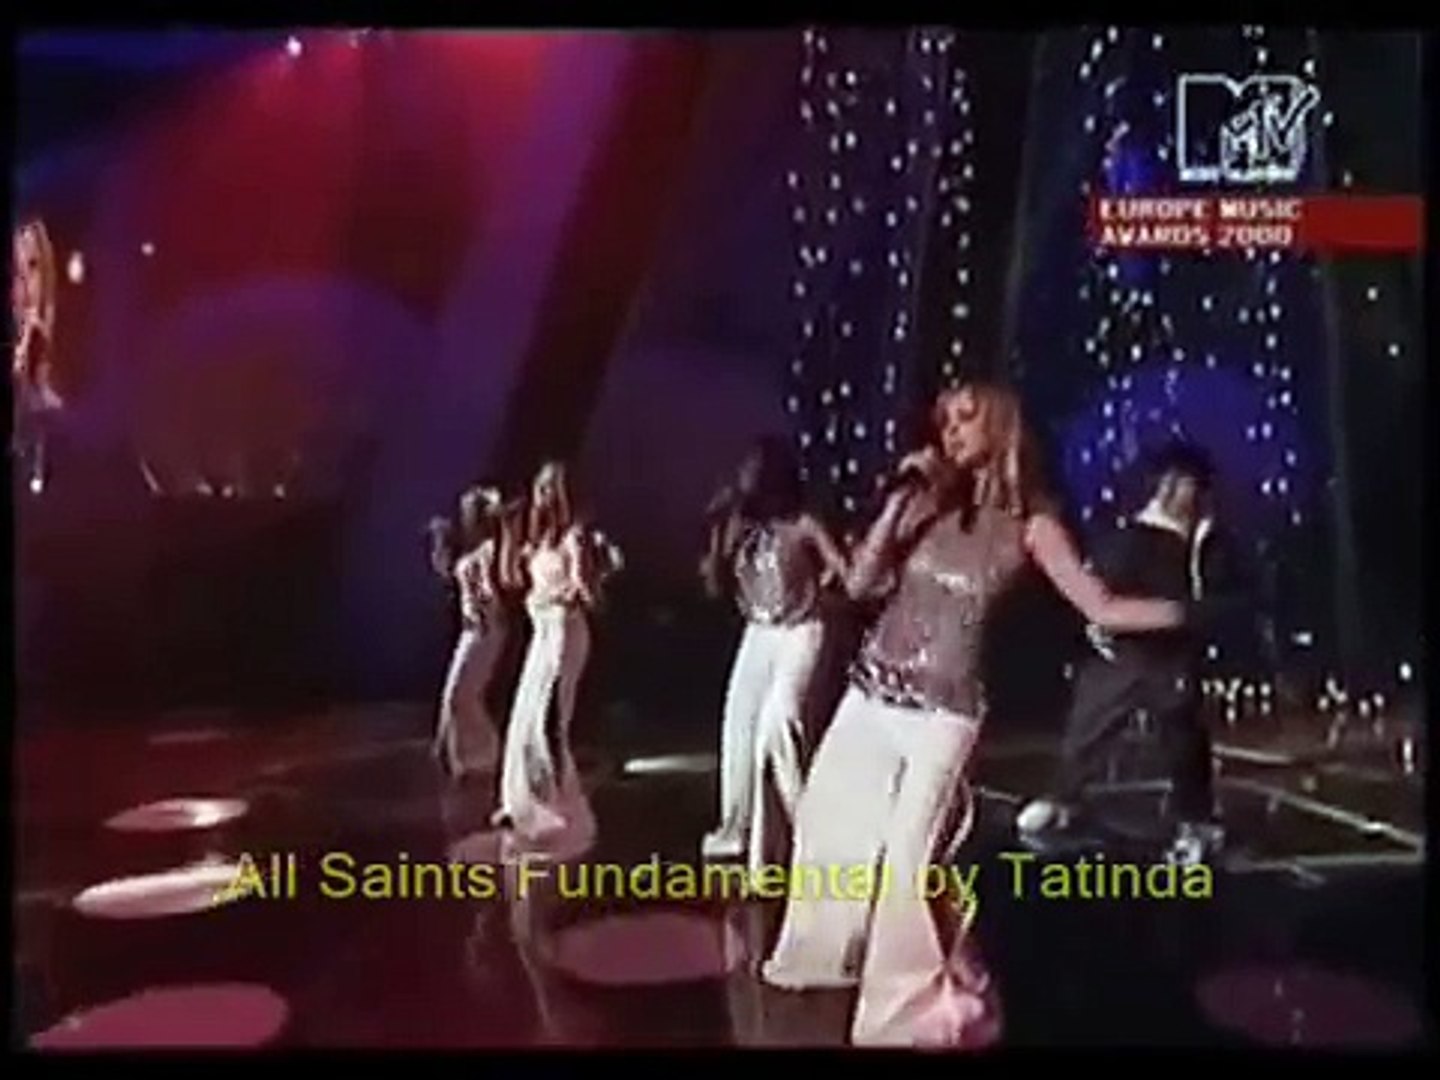 All Saints Pure Shores Europe Music Awards - video Dailymotion